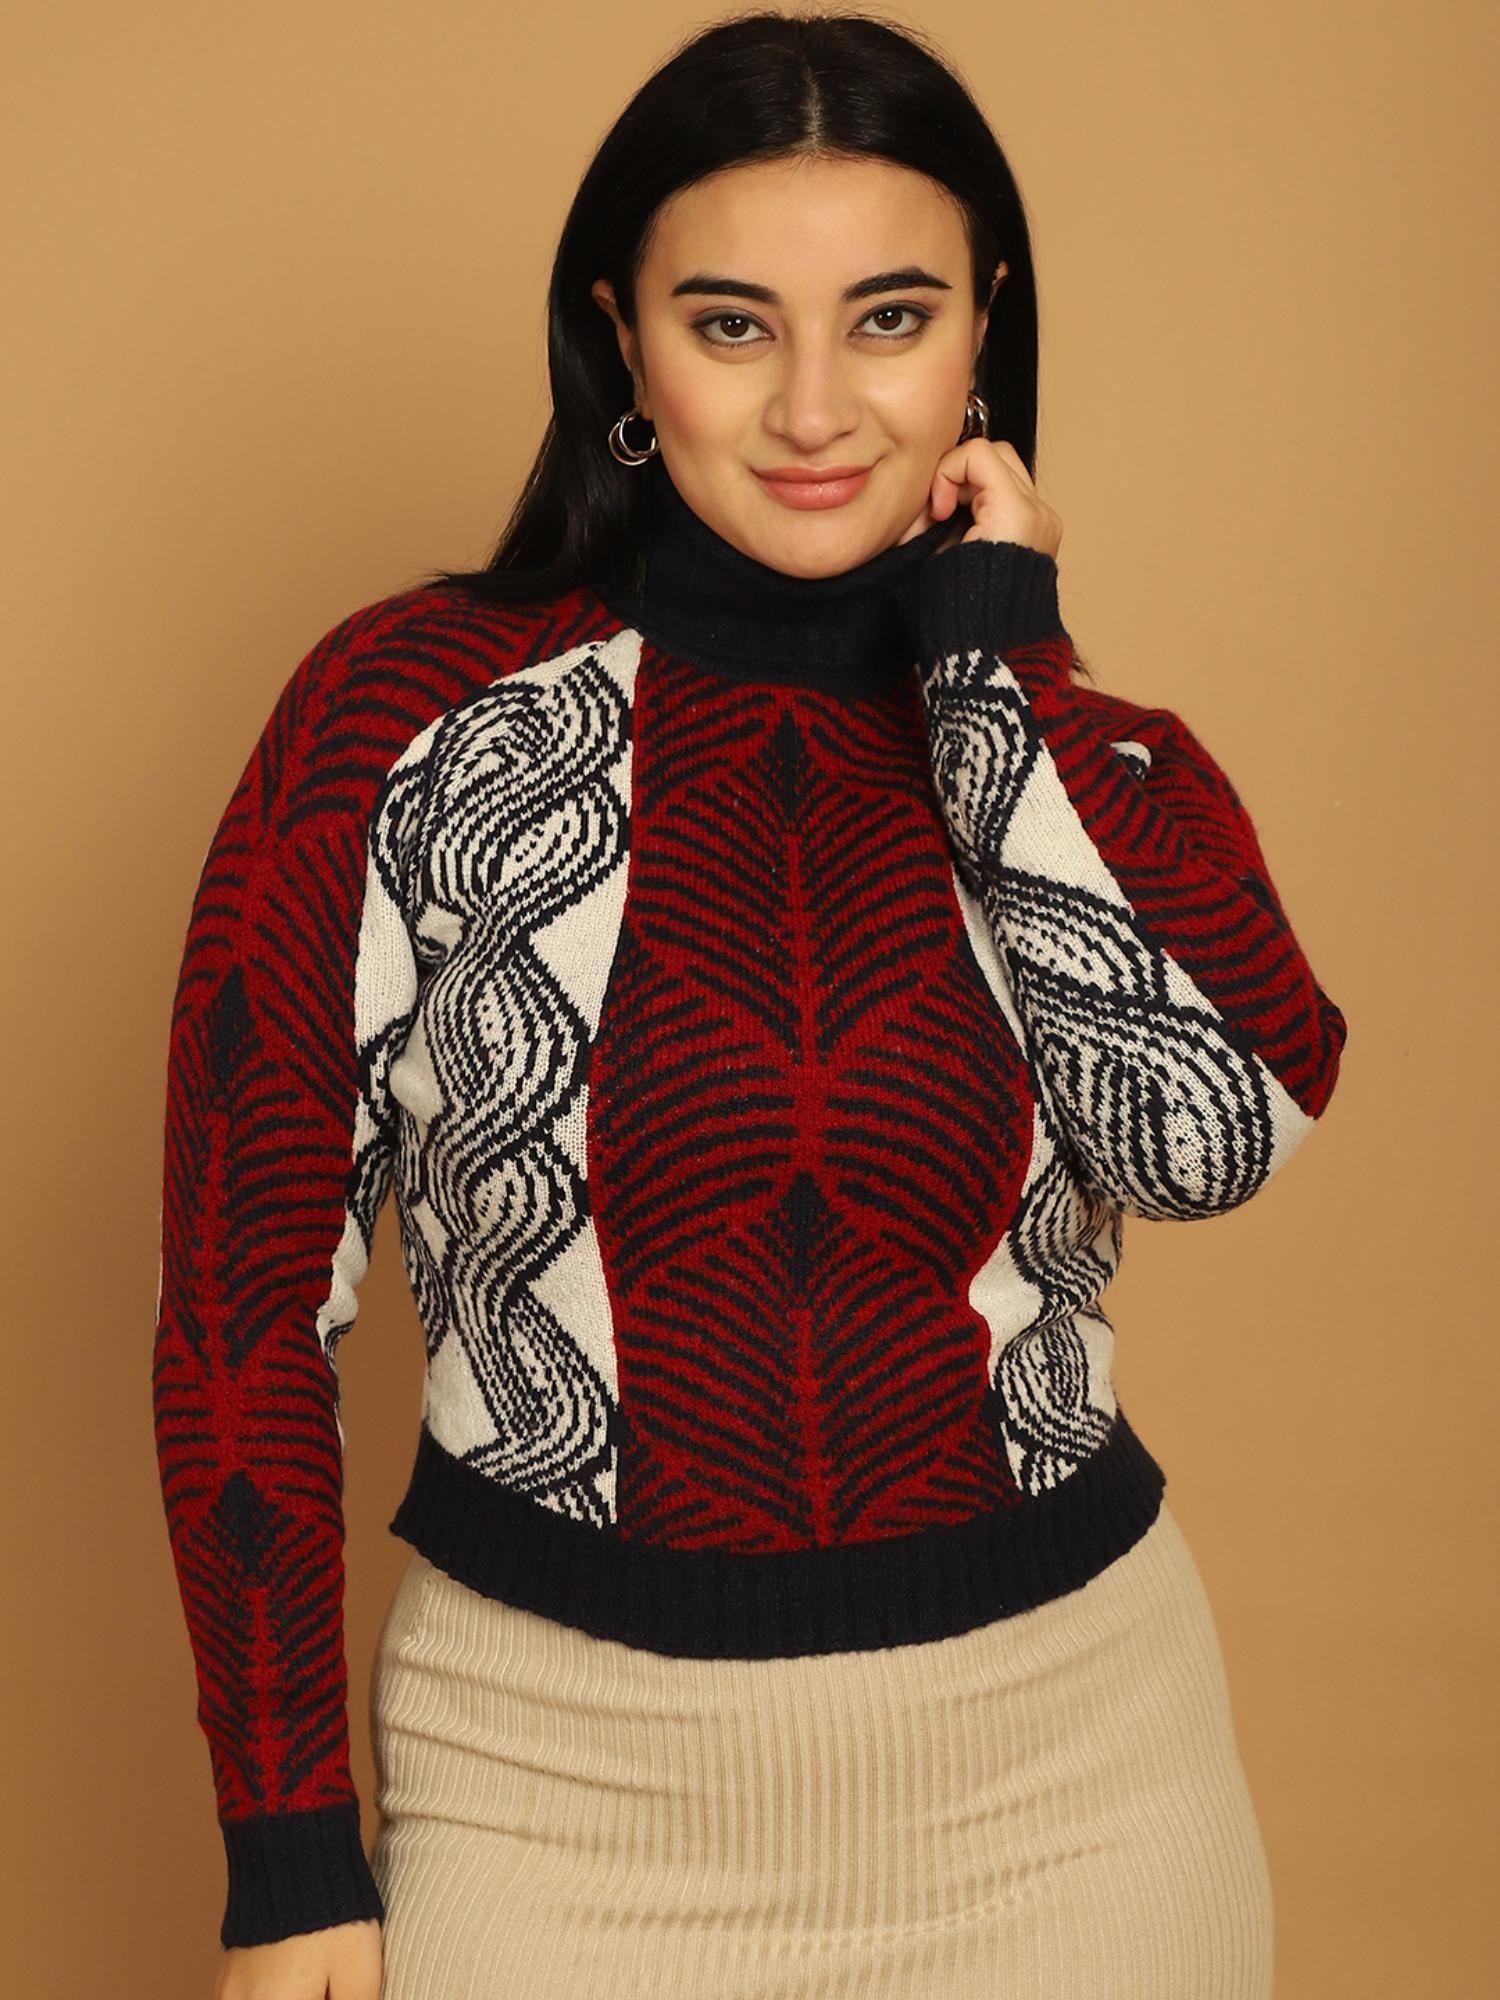 women's-acrylic-full-sleeve-printed-red-sweater